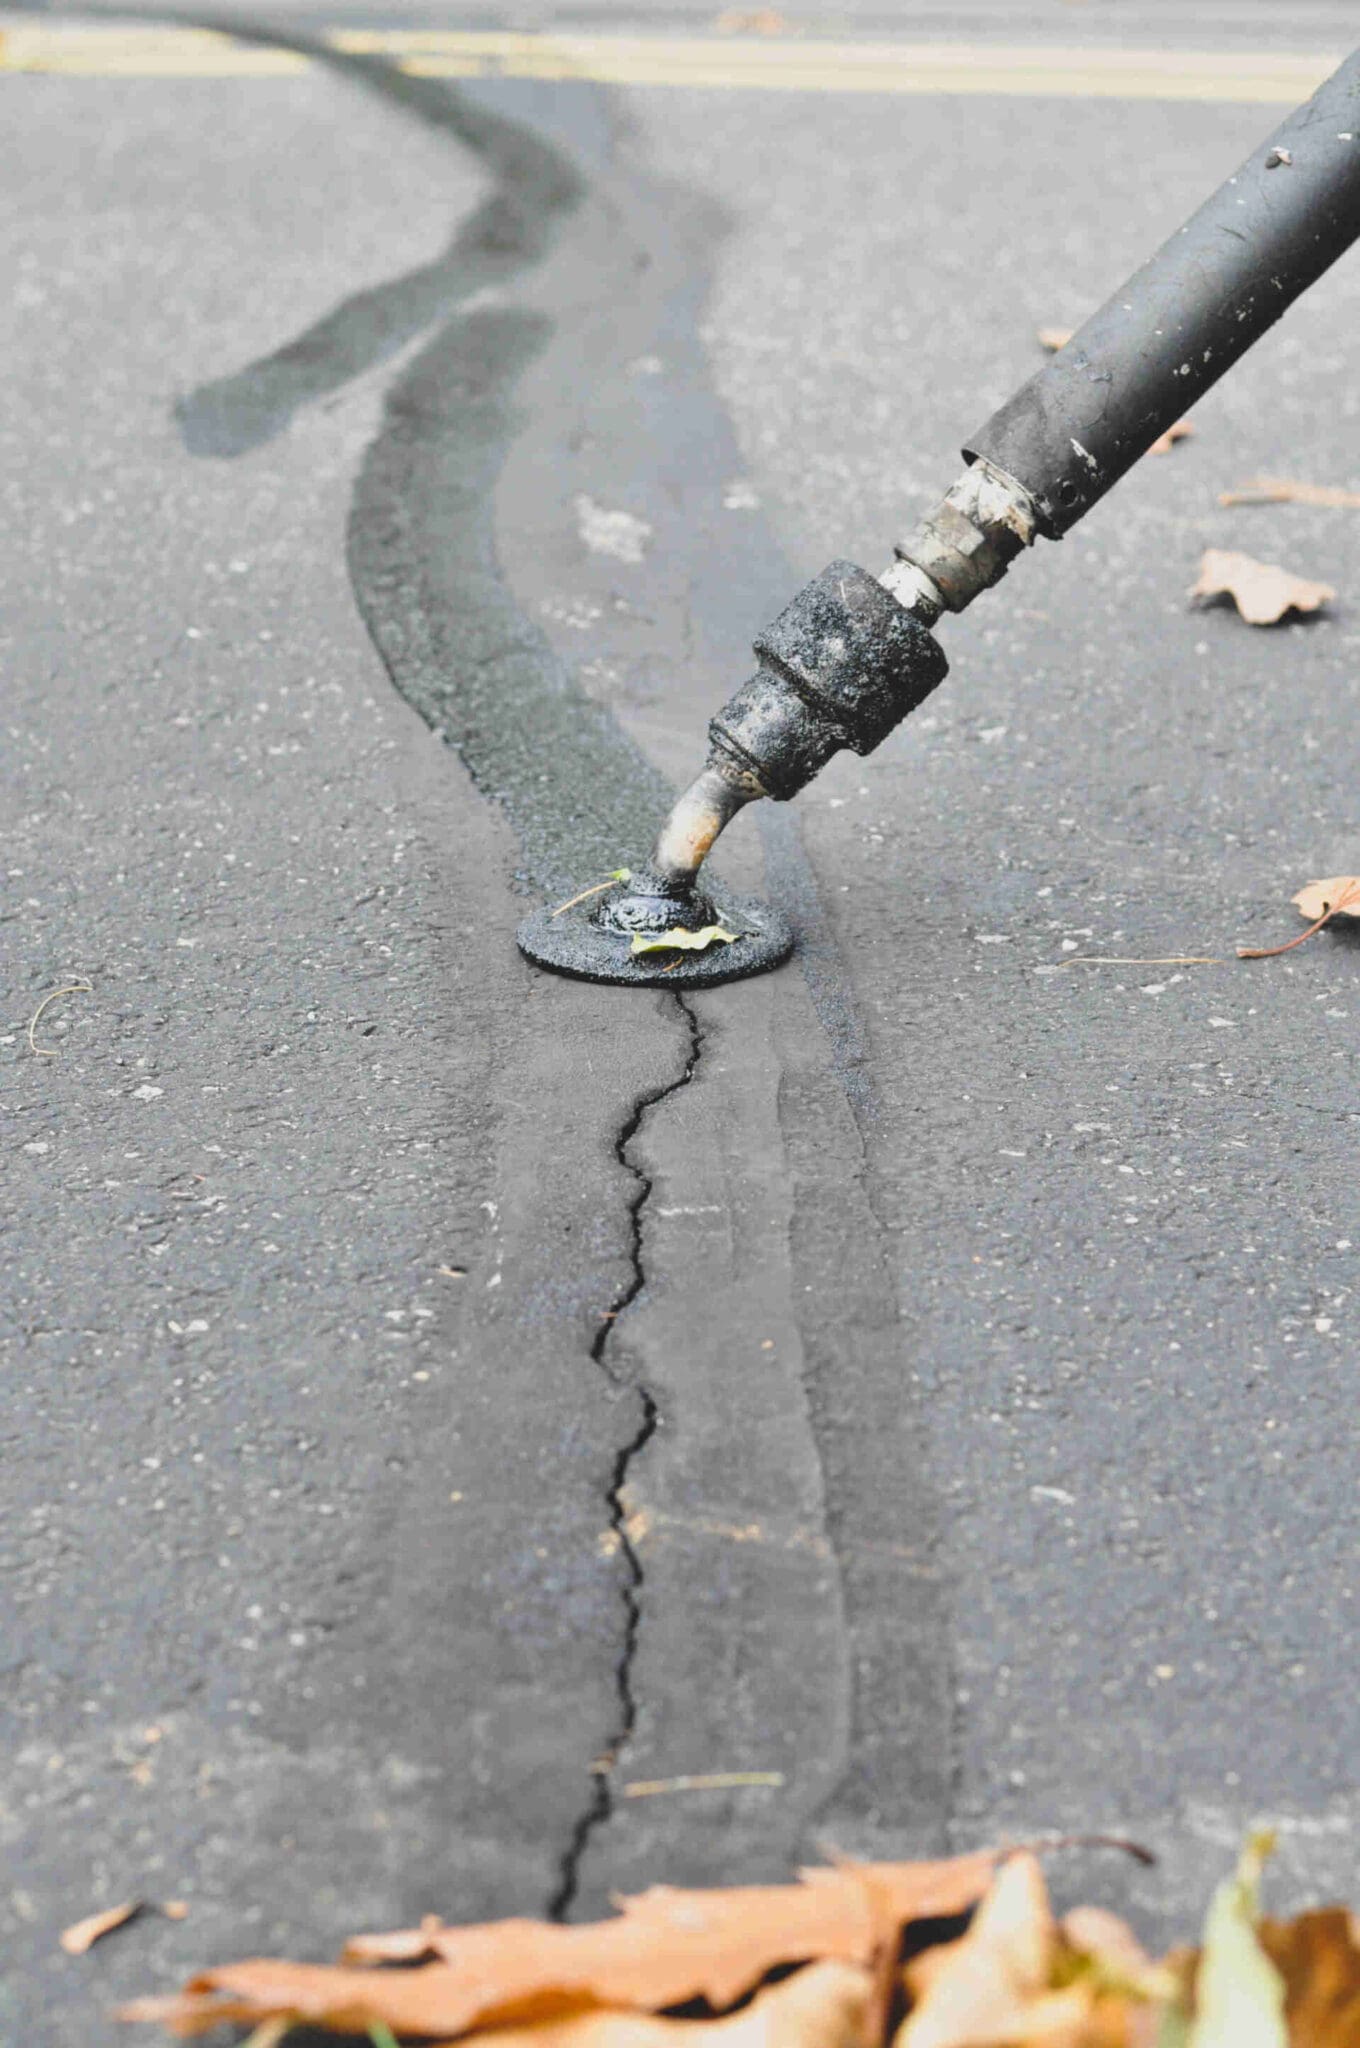 Eosso Brothers Paving - Crack filling